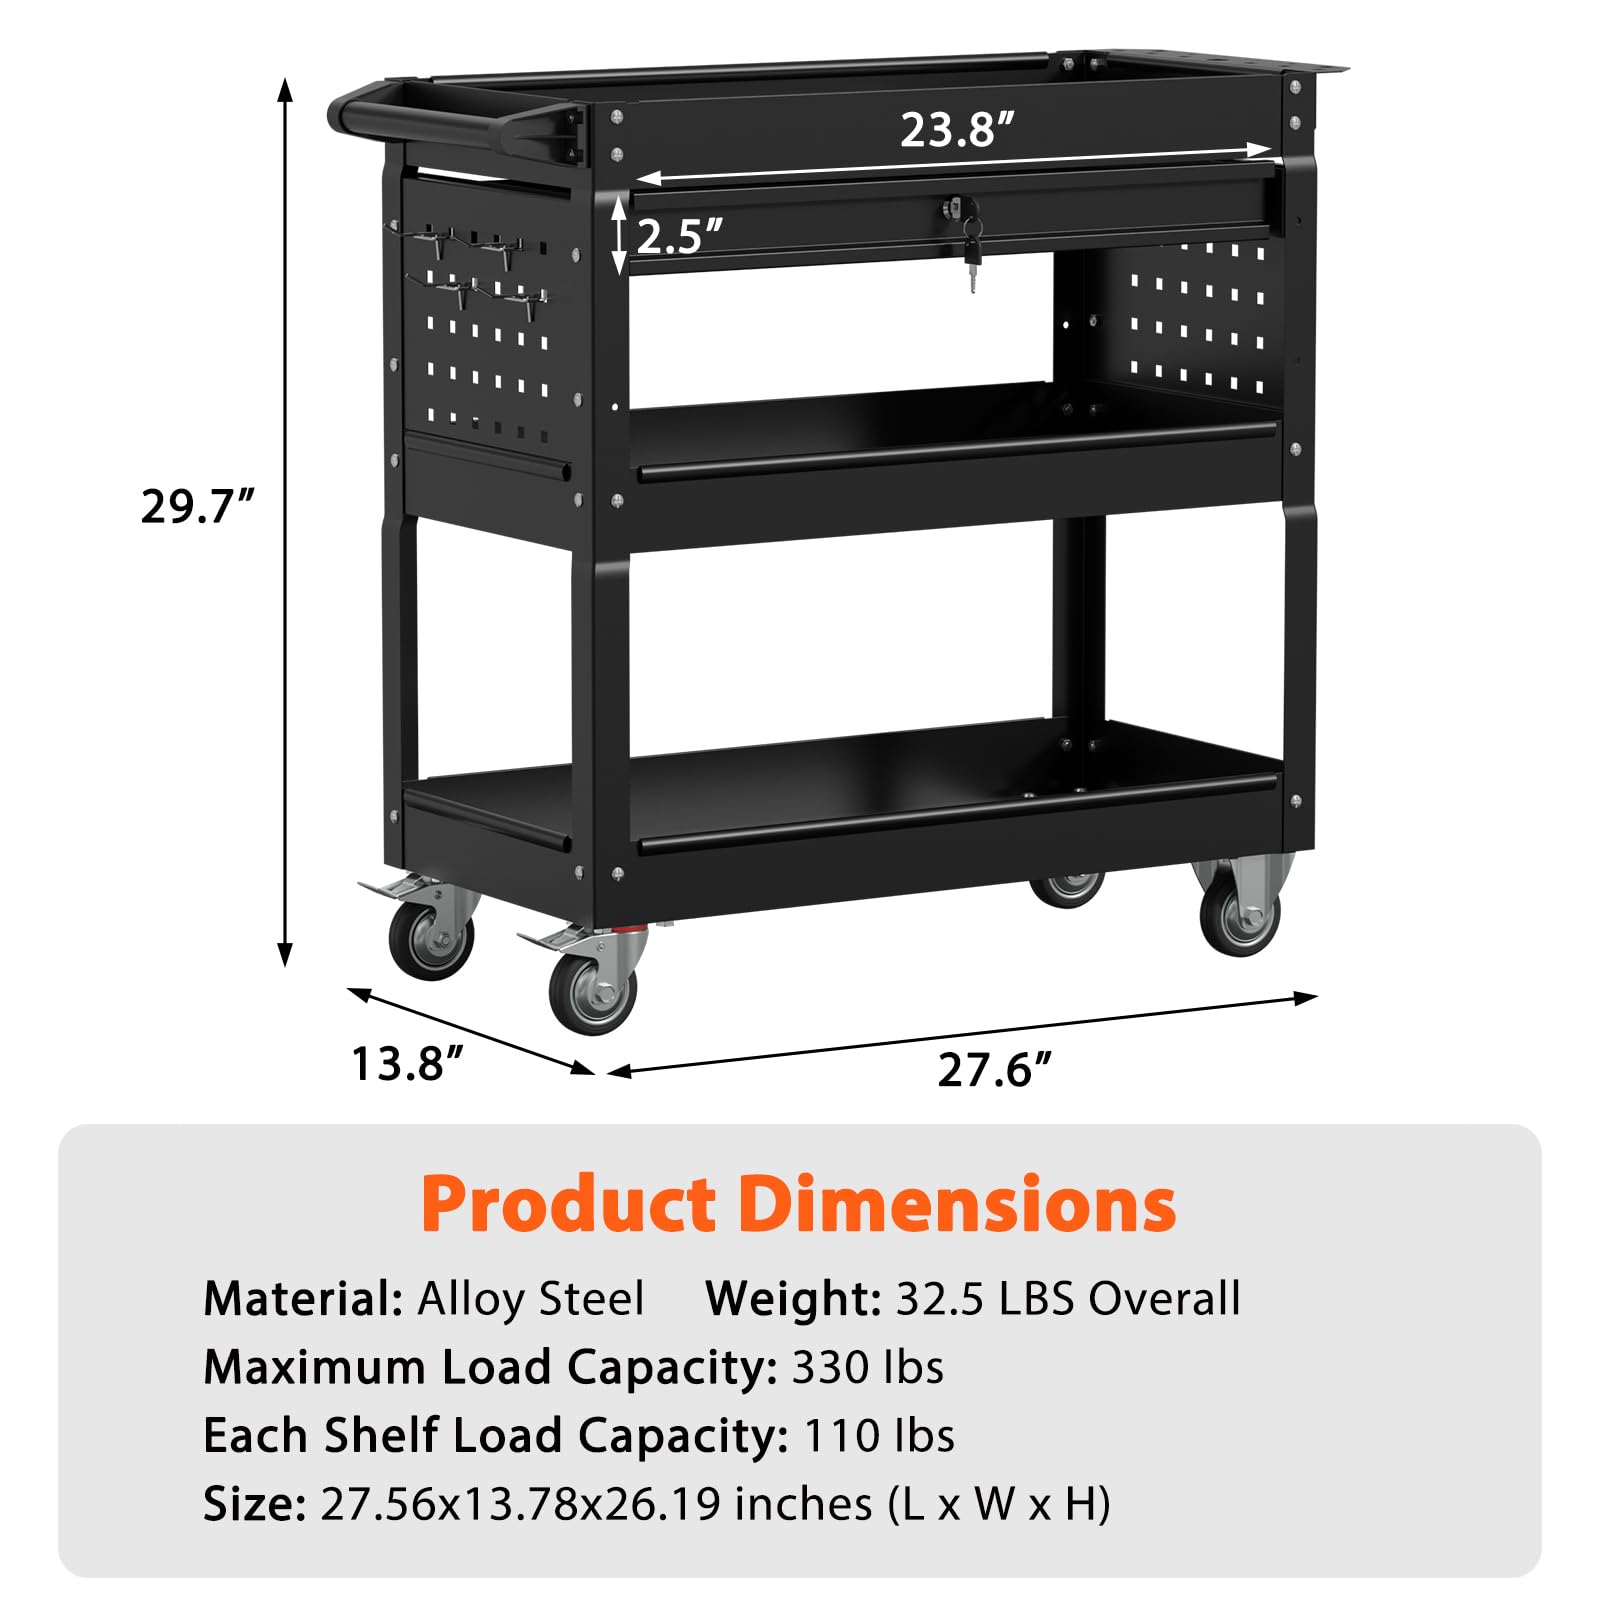 3 Tier Tool Cart on Wheels with Lockable Drawer, Heavy Duty Rolling Tool Cart,Large Storage Capability Tool Cart with Drawers, Suitable for Garage, Warehouse, and Repair Shop (Black)